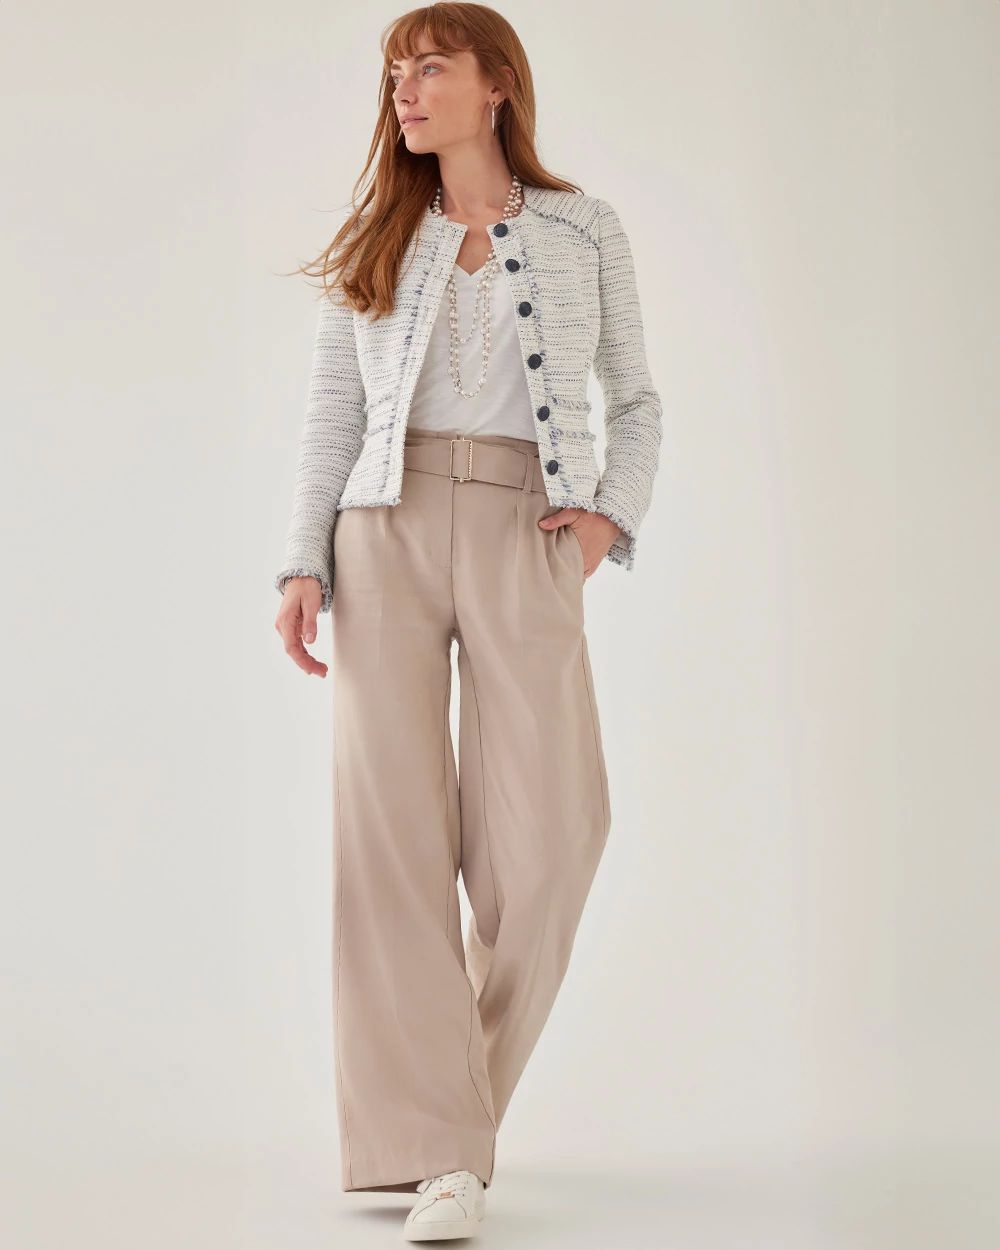 Belted Wide-Leg Woven Pants click to view larger image.